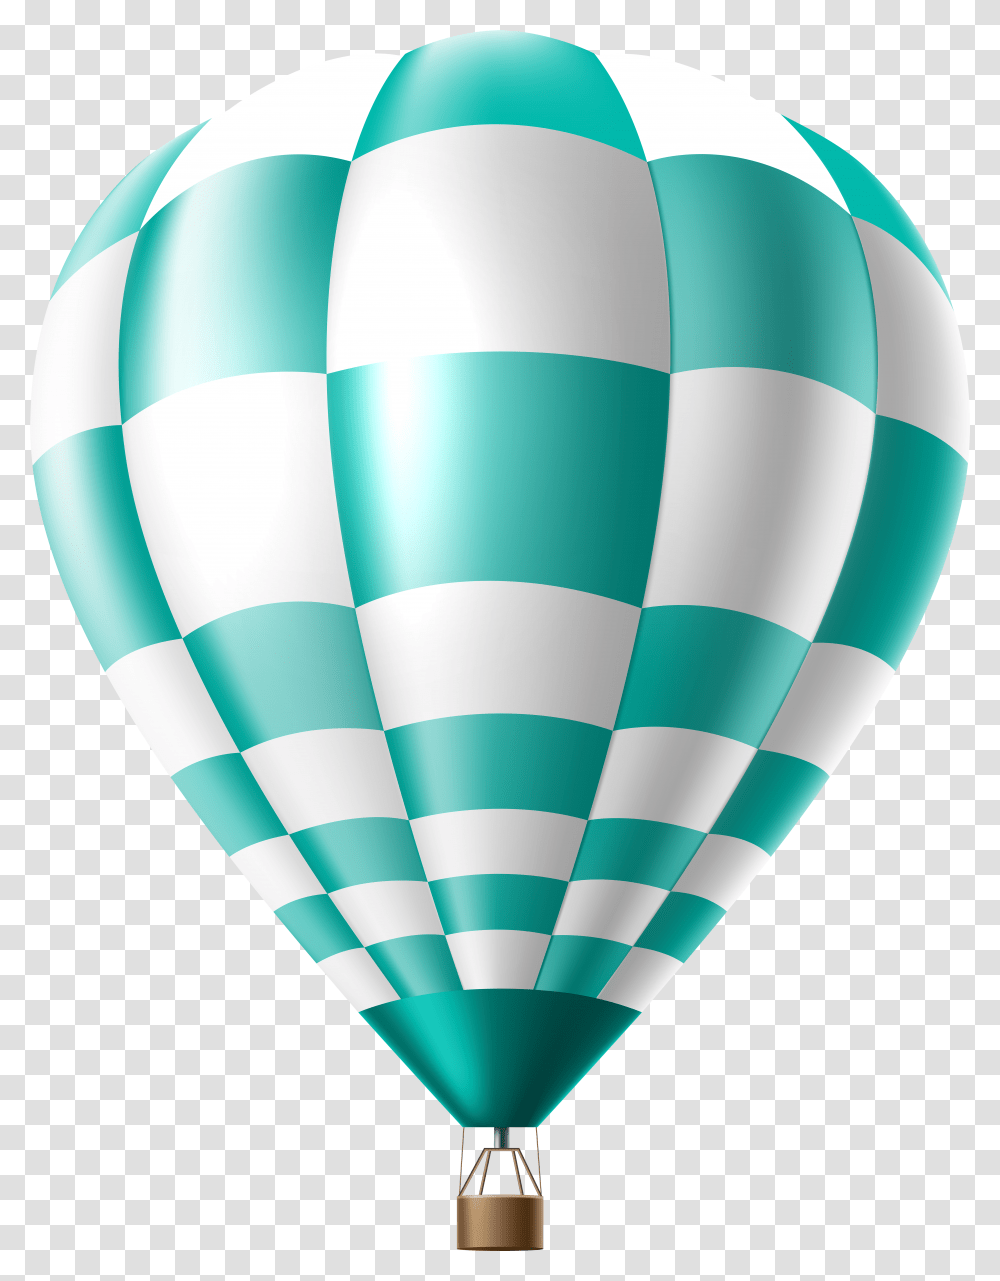 Hot Air Balloon Clipart Download Free Hot Air Balloon Clipart Background Transparent Png